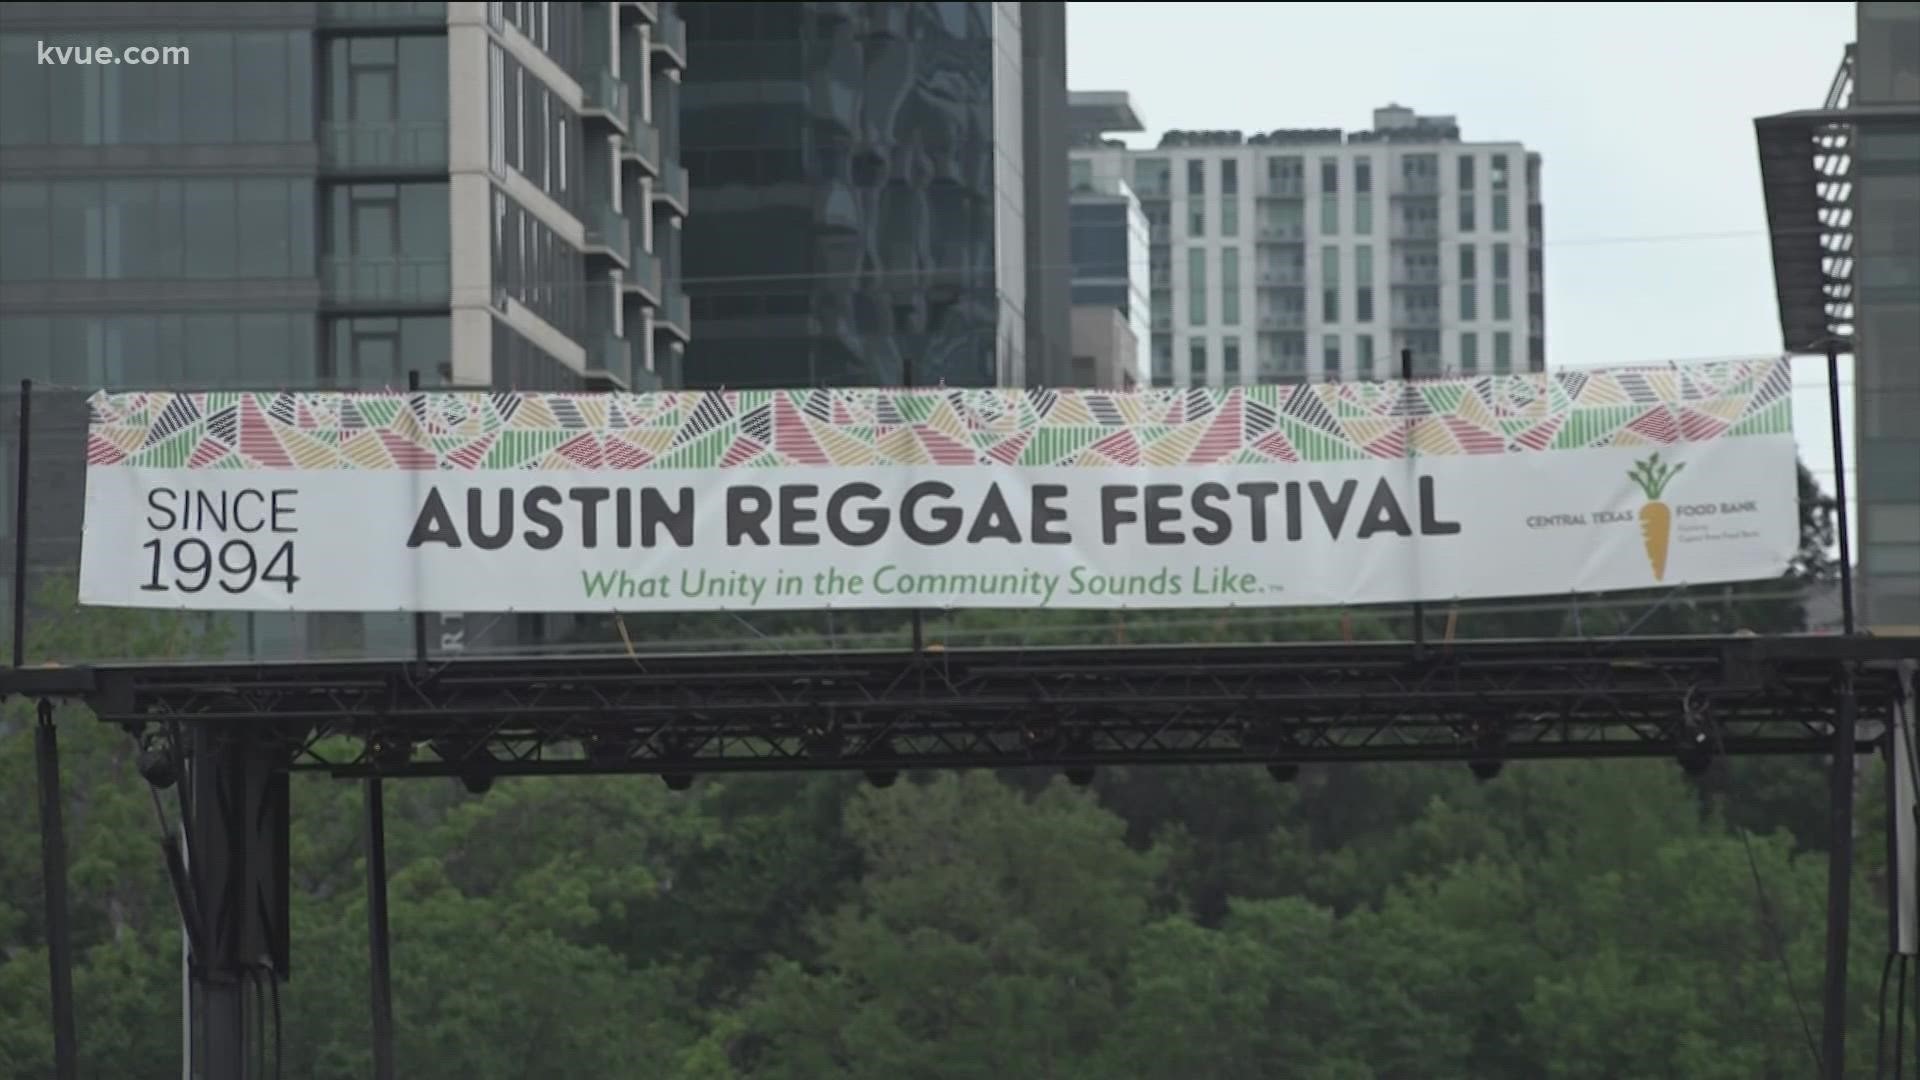 Bob Marley's son, Julian Marley, is one the main attractions at this year's Austin Reggae Festival which is now celebrating its 27th year.